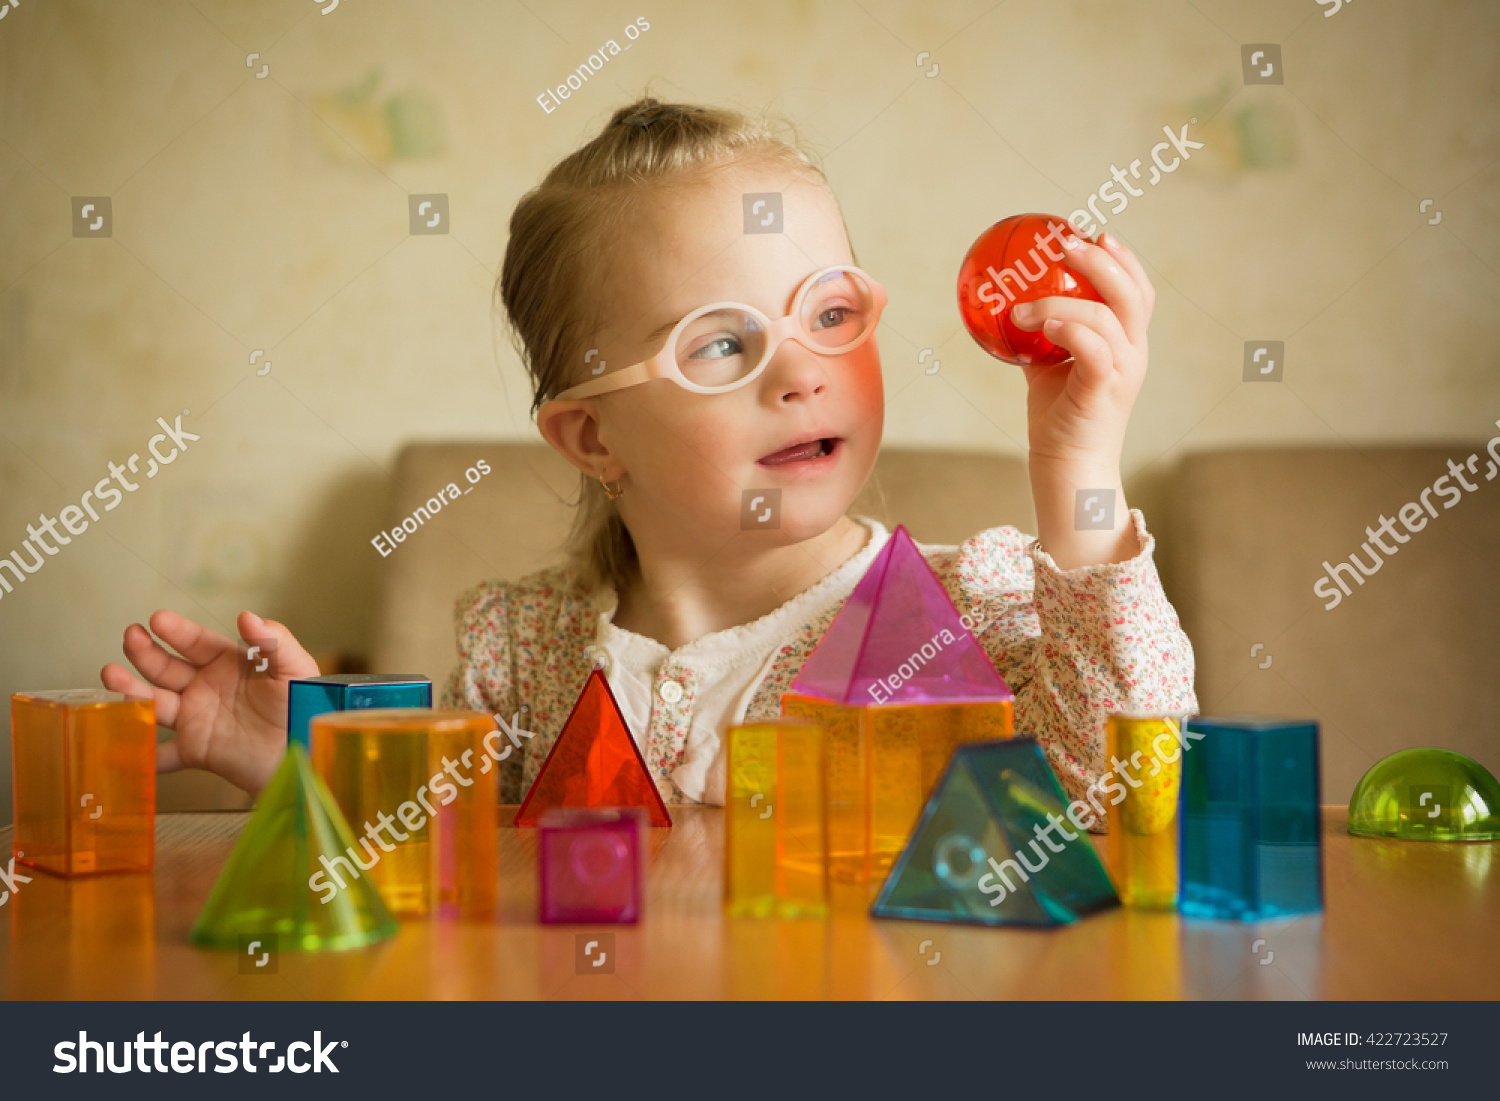 Girl with Down syndrome playing with geometrical shapes #422723527